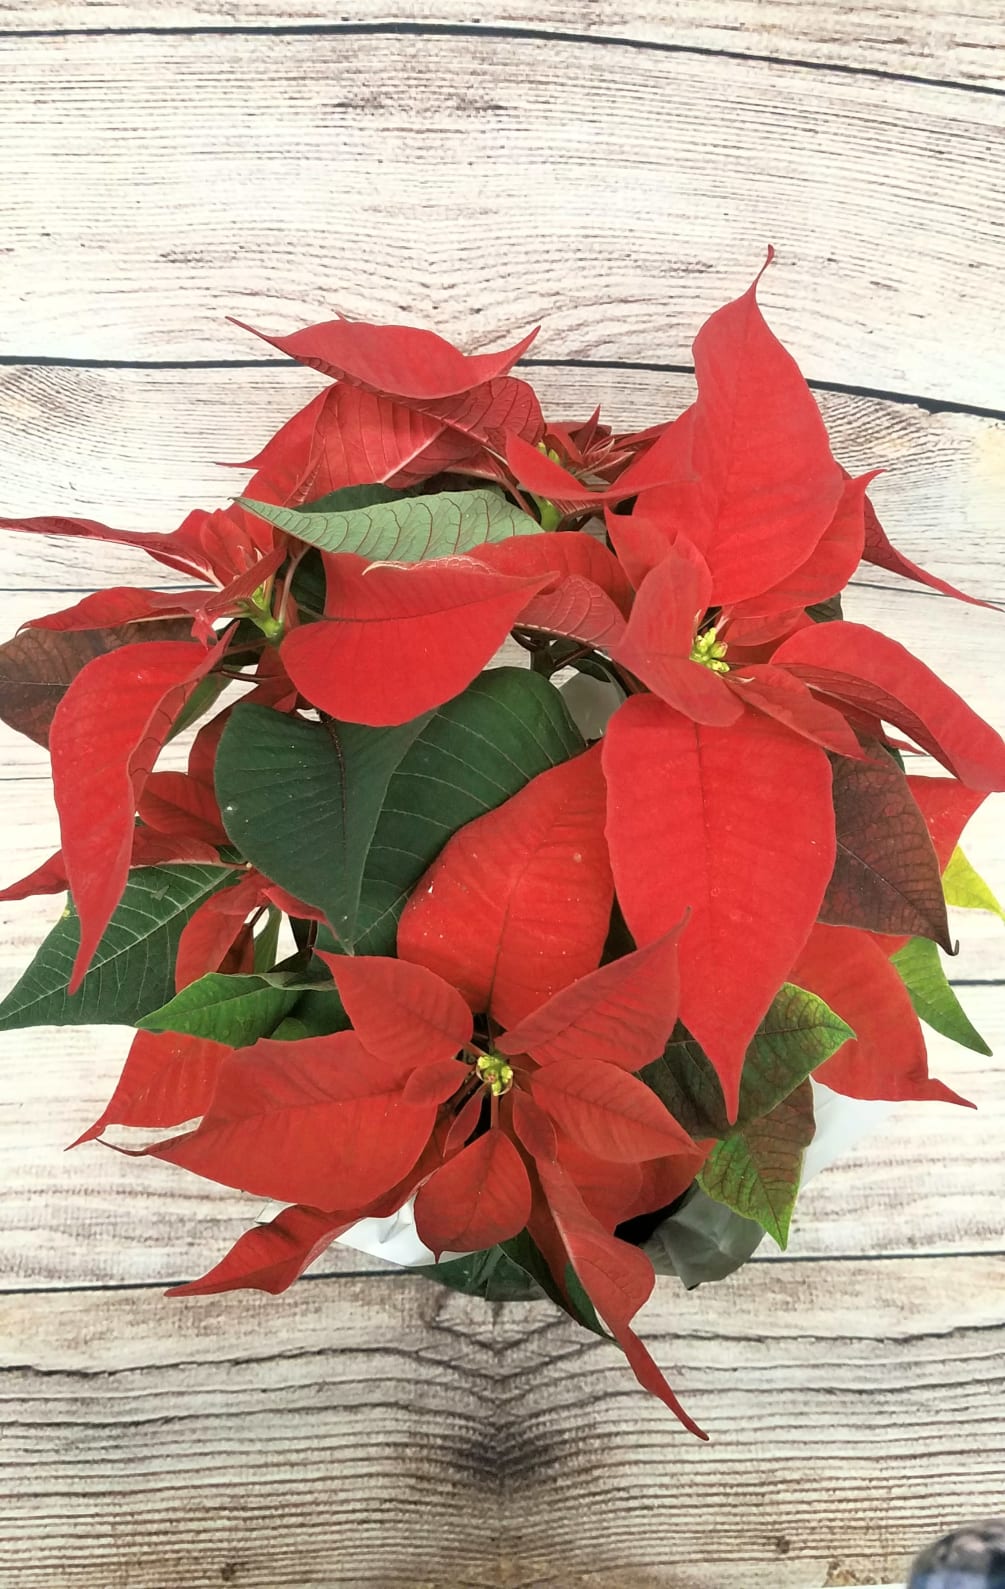 Say it with tradition! Give a gift of a pretty poinsettia dressed